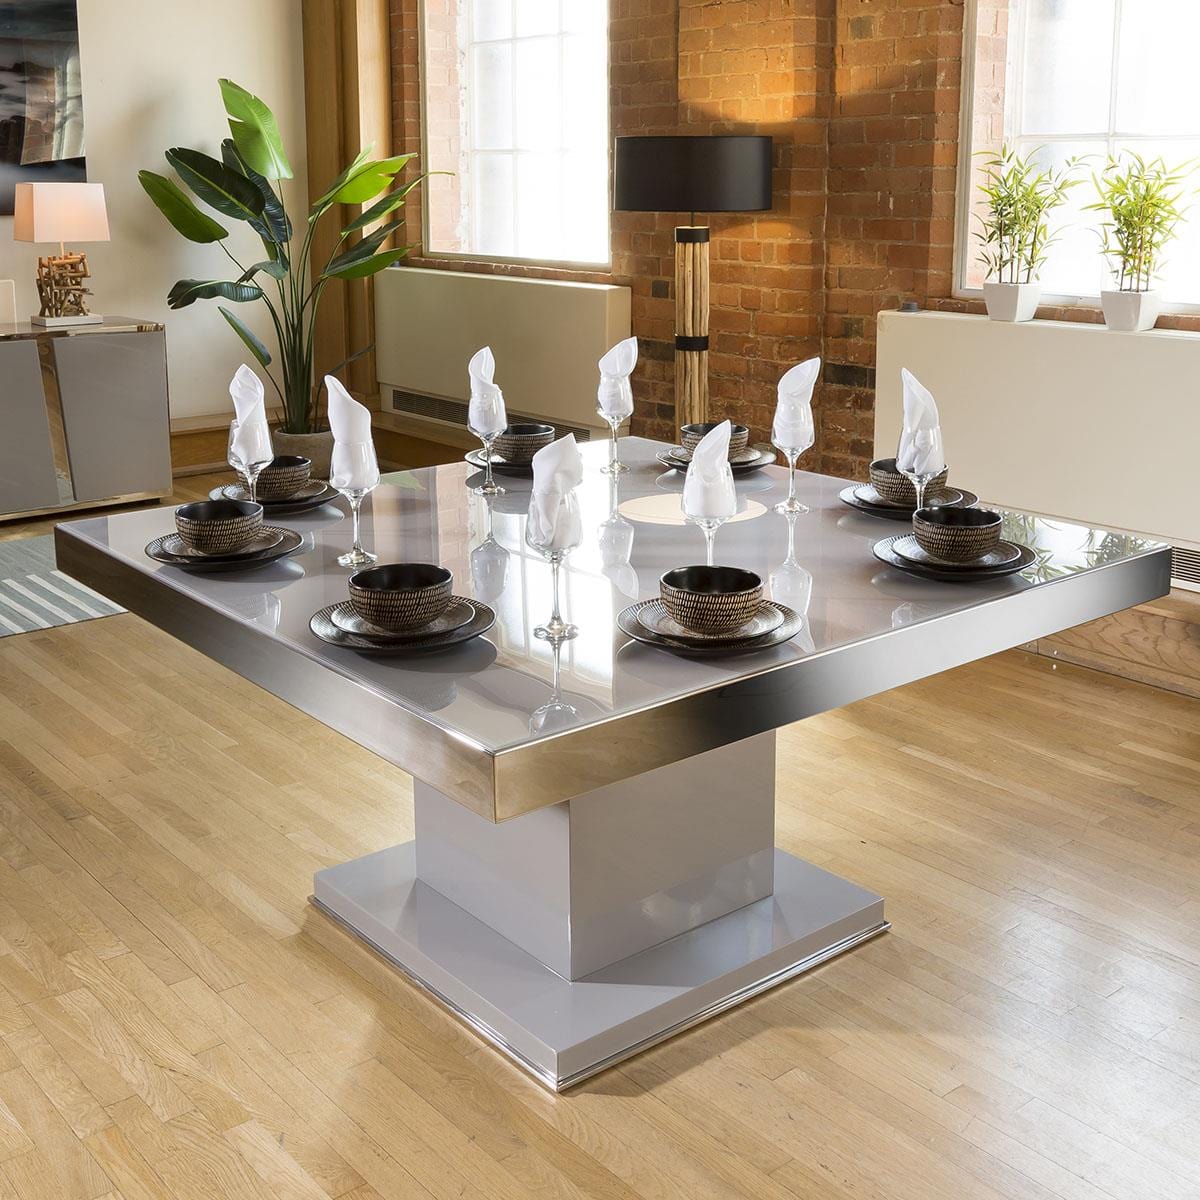 Quatropi Magnificent Large Square Dining Table in Grey Gloss with Chrome Trim